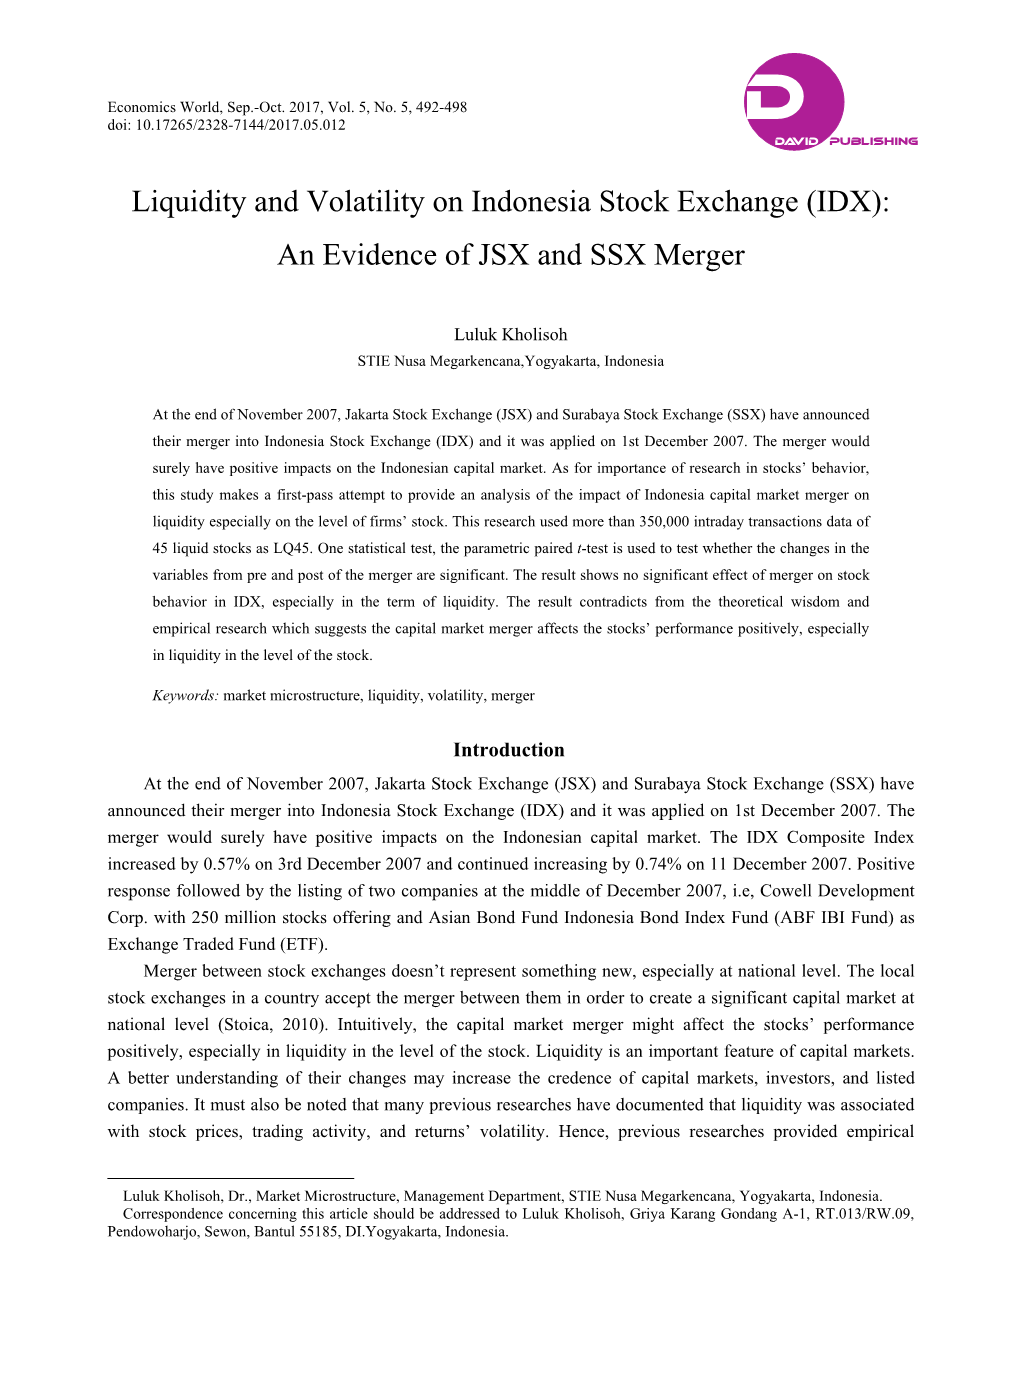 Liquidity and Volatility on Indonesia Stock Exchange (IDX): an Evidence of JSX and SSX Merger